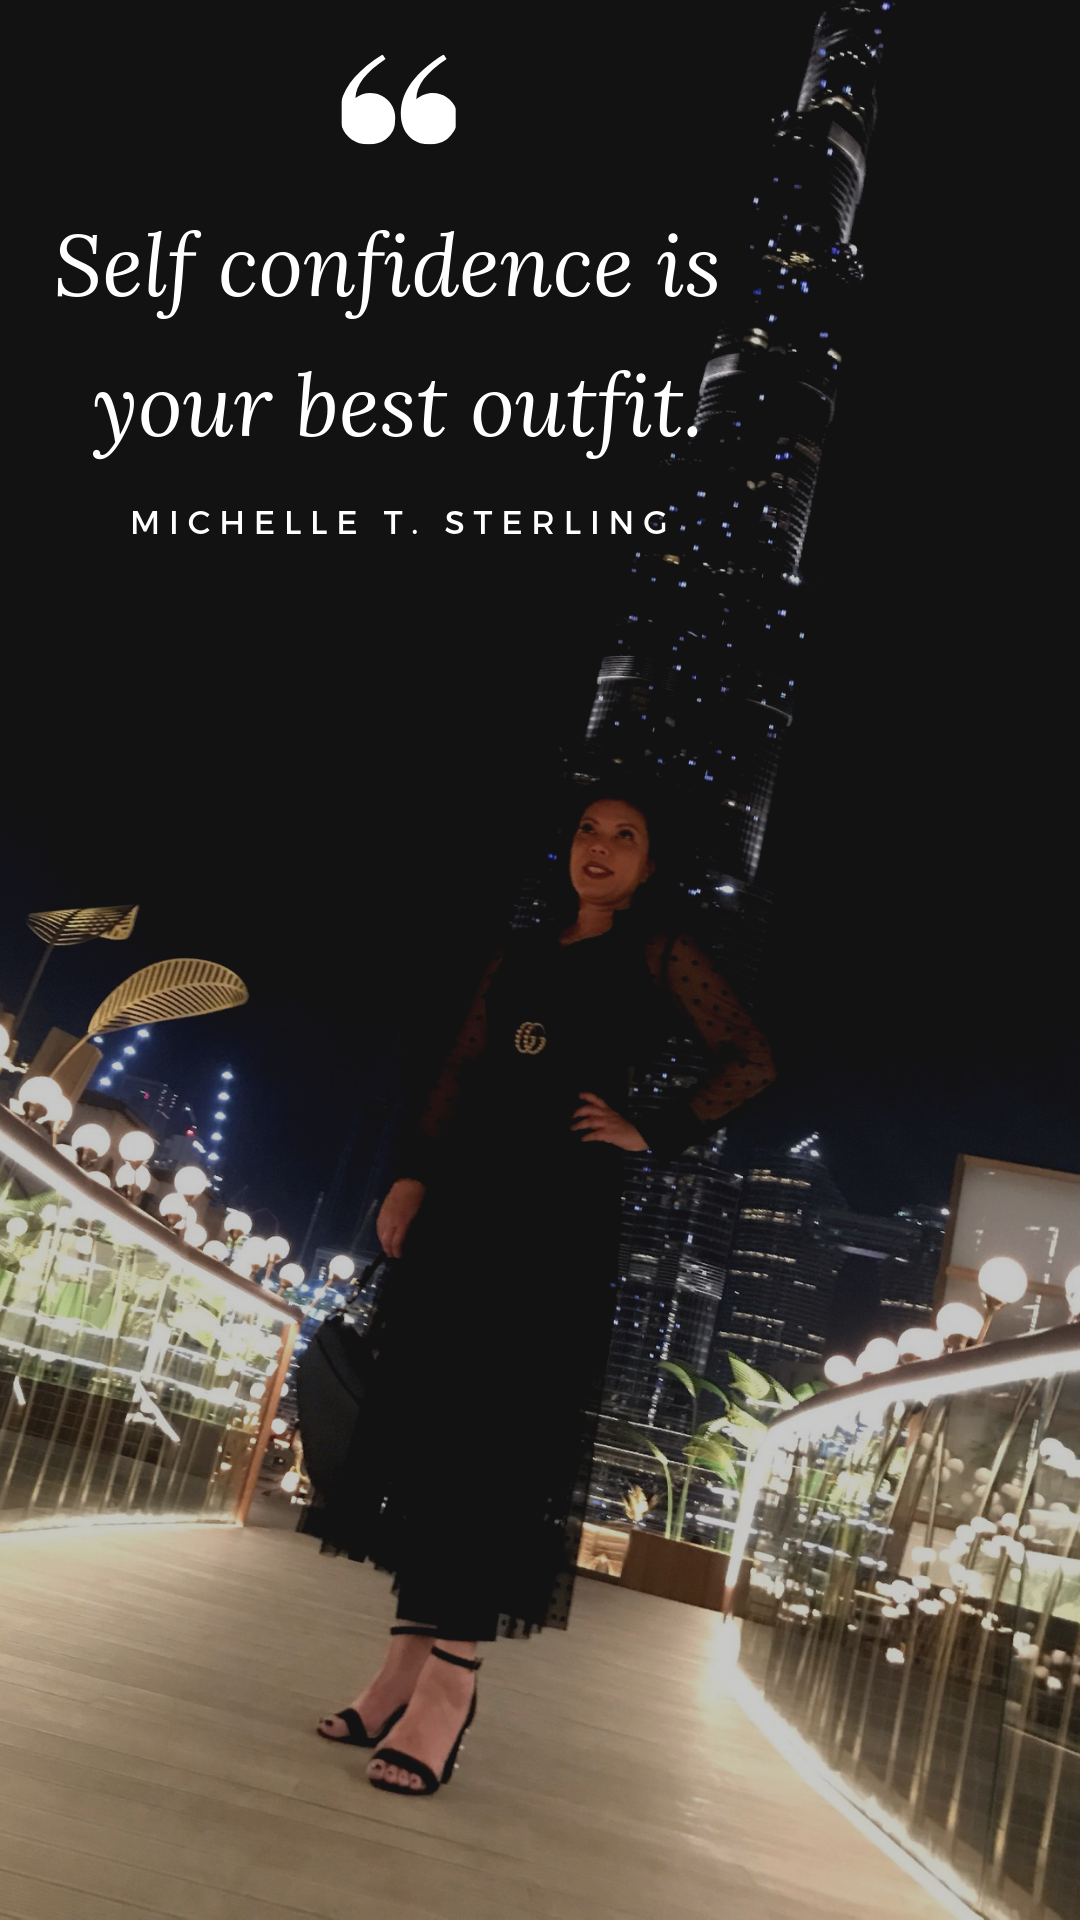 Top Image Consultants in the World like Michelle T. Sterling travel to serve clients globally